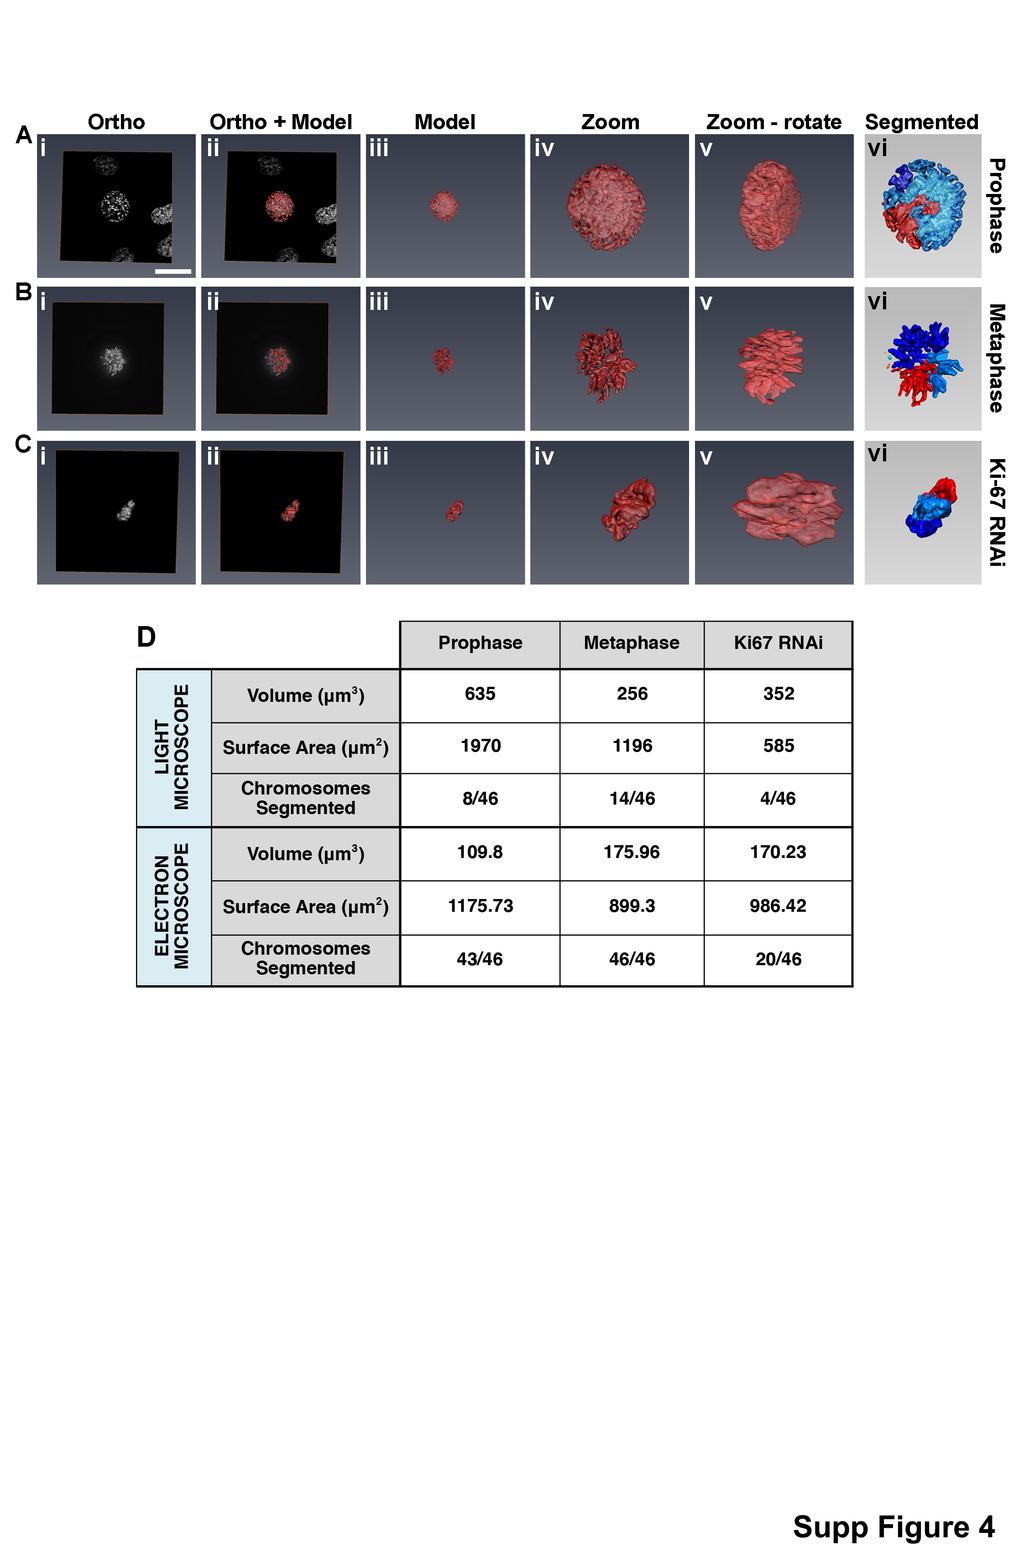 Supplementary Figure 4 (related to Figures 3, 4 and 6) Supplementary Fig. 4: Direct comparison of correlative 3D modeling using DAPI and SBF-SEM reveals large discrepancies.